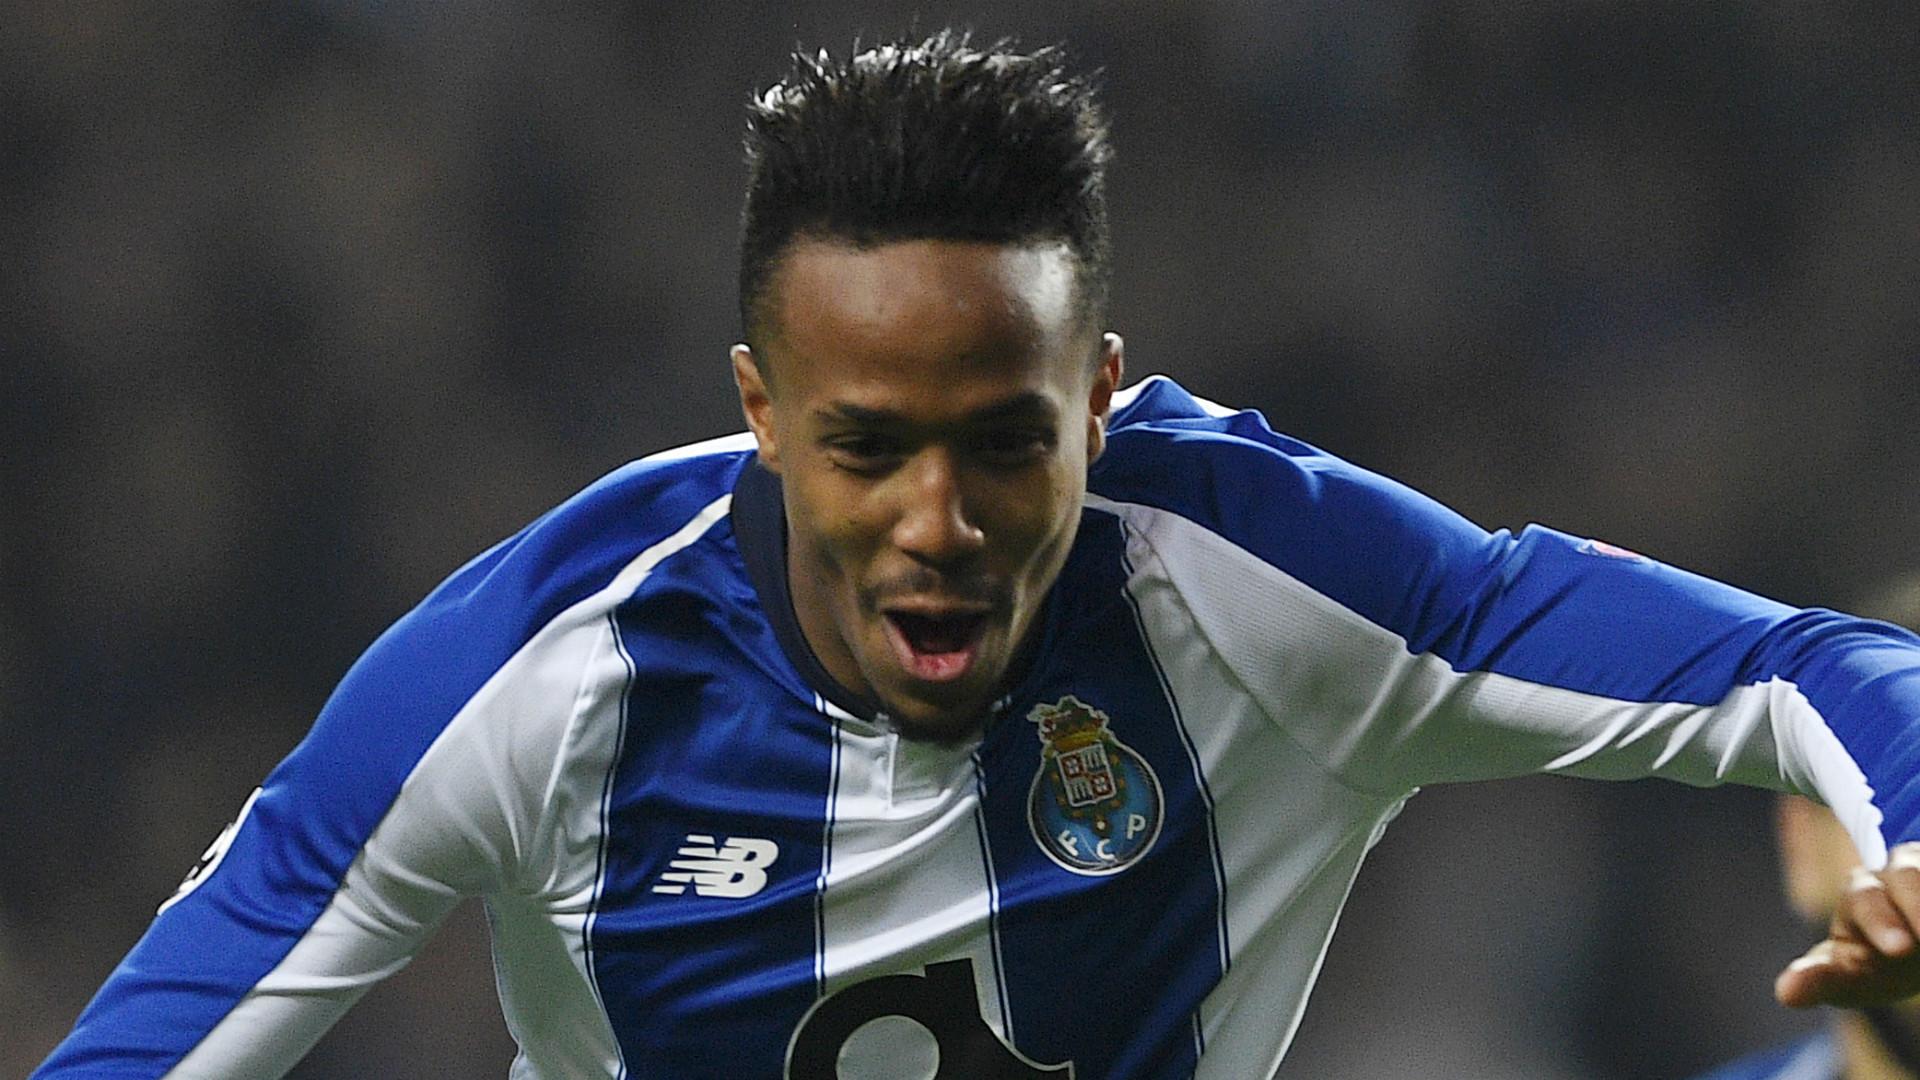 Who is Eder Militao? Real Madrid's new €50 million defender